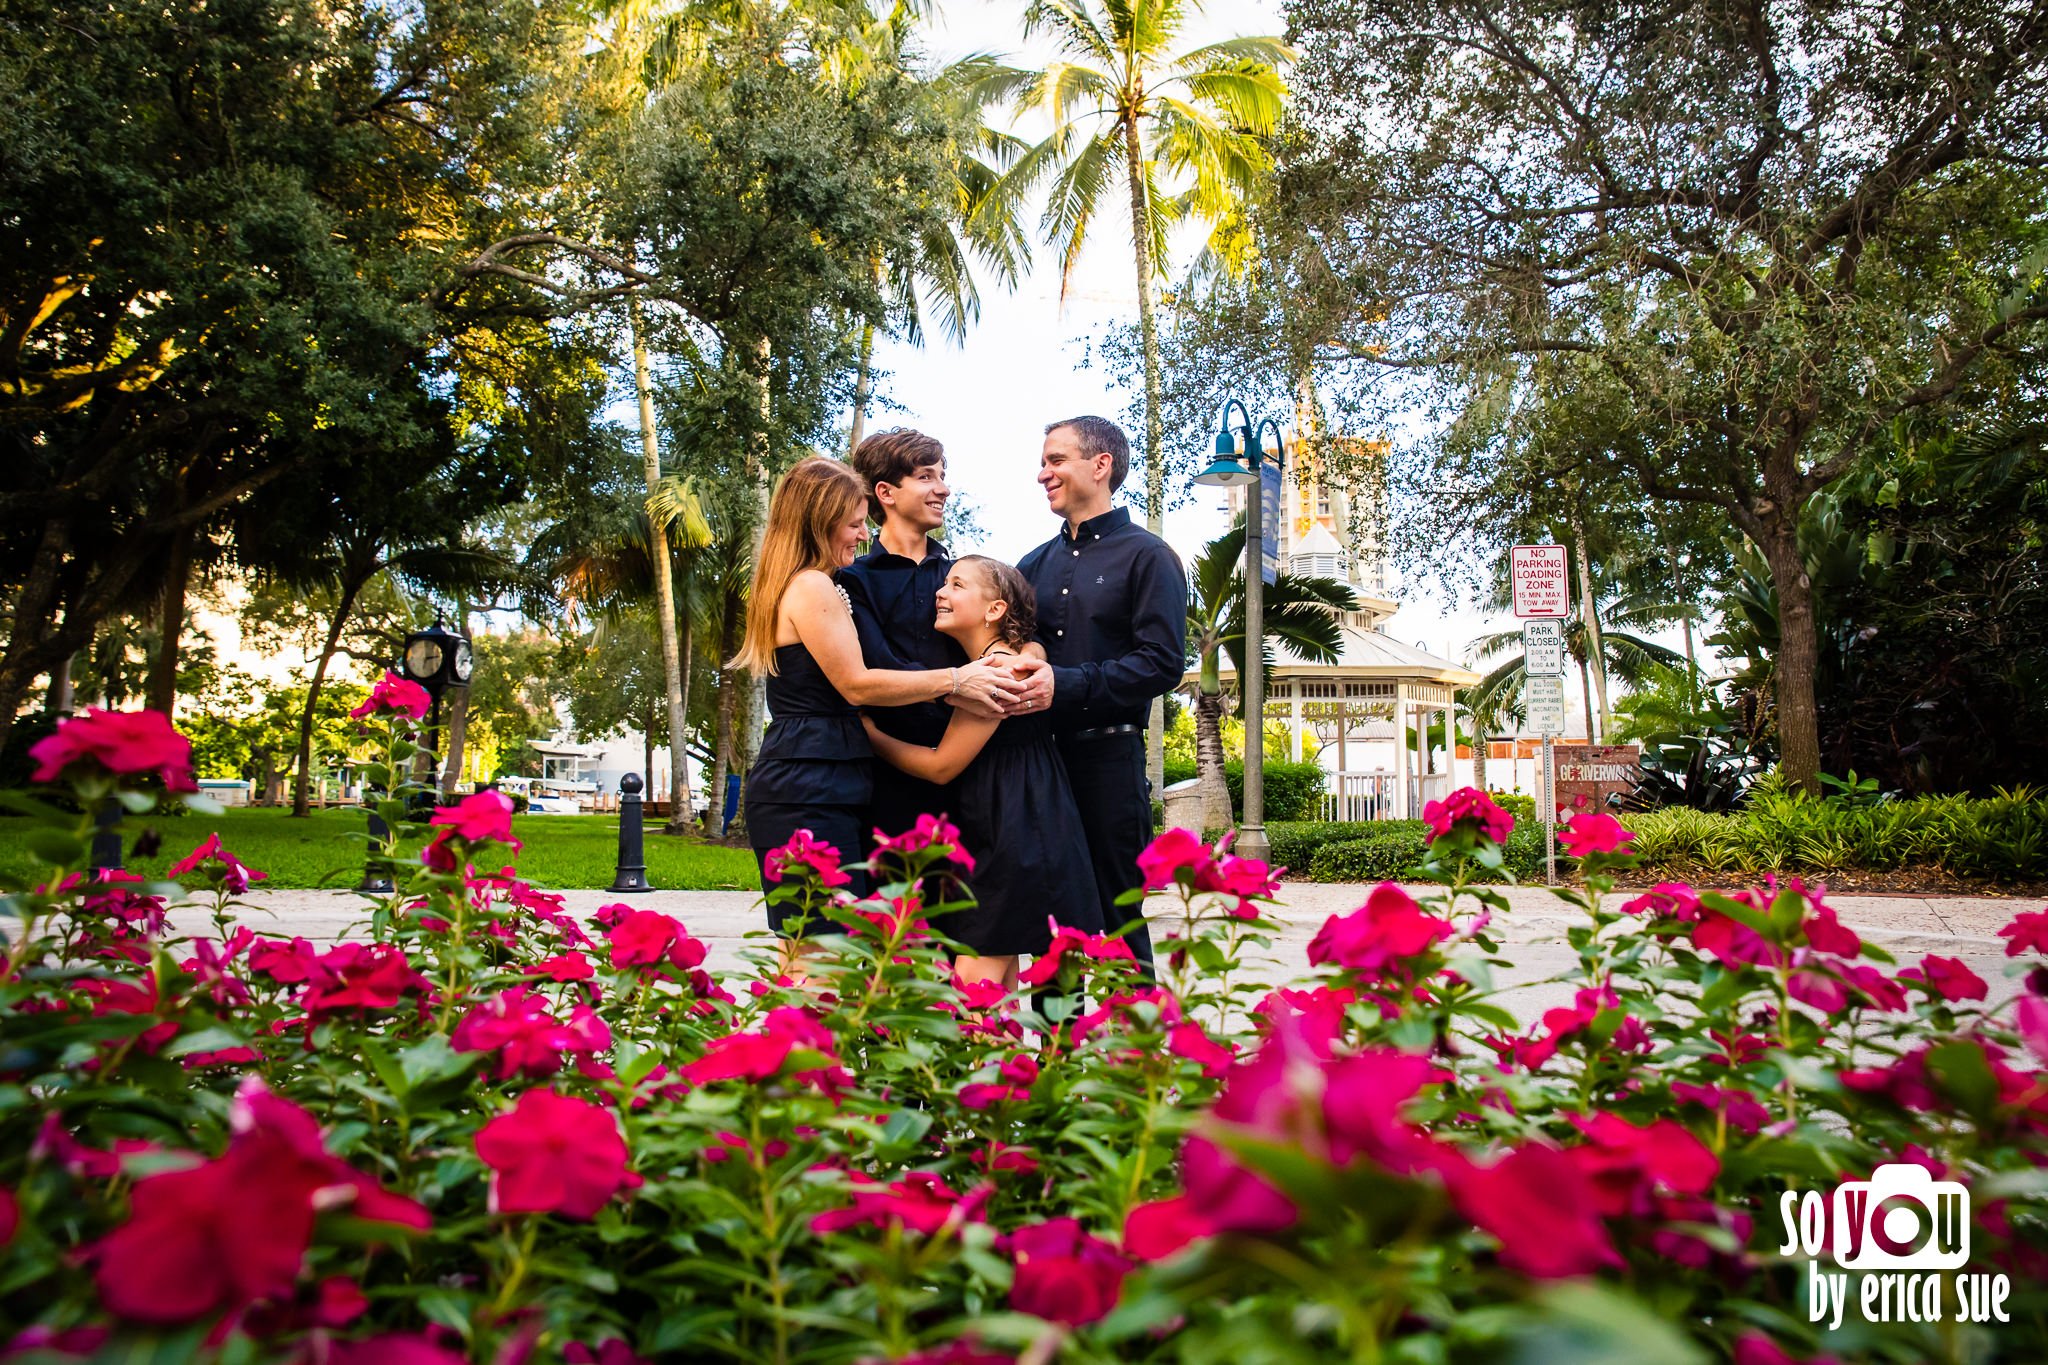 10-riverwalk-ft-lauderdale-lifestyle-family-photographer-so-you-by-erica-sue-ES1_3901.JPG